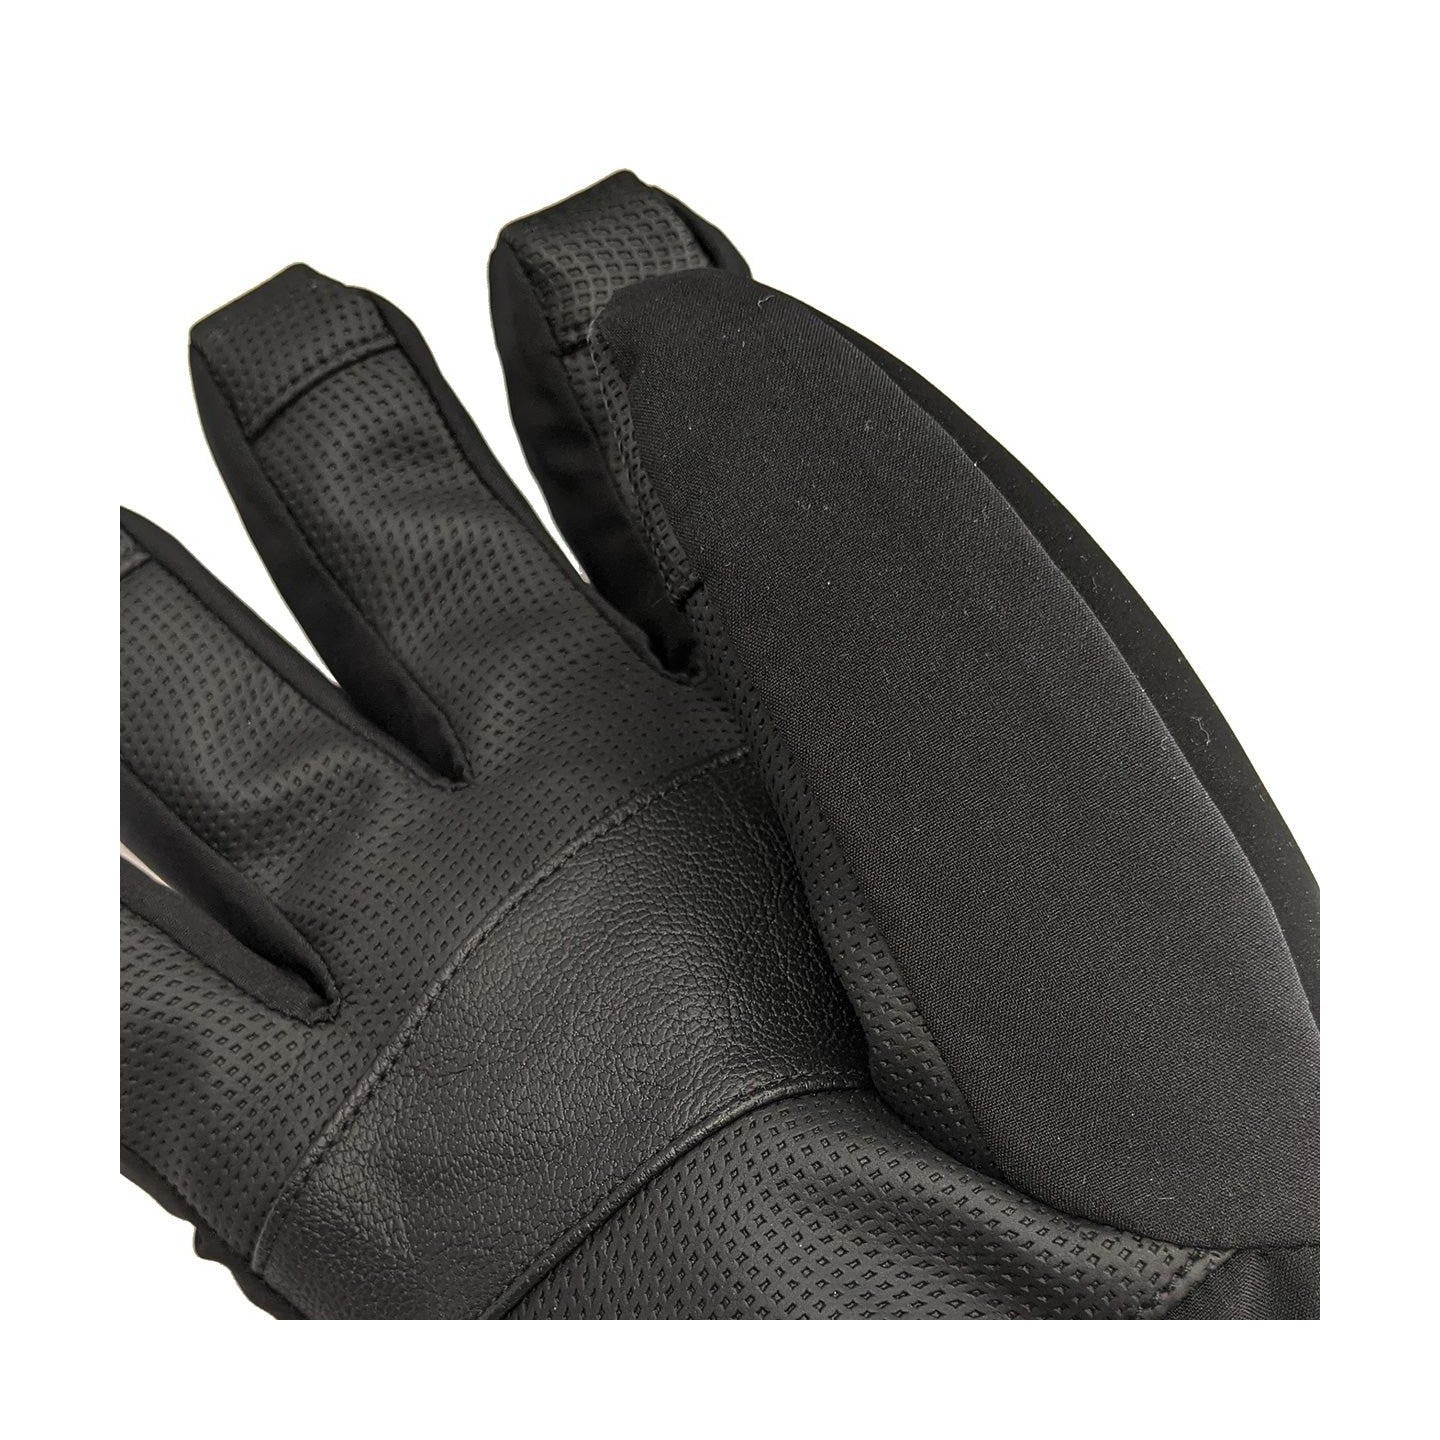 CTR Max Ski Glove Style:1518 - CTR Outdoors